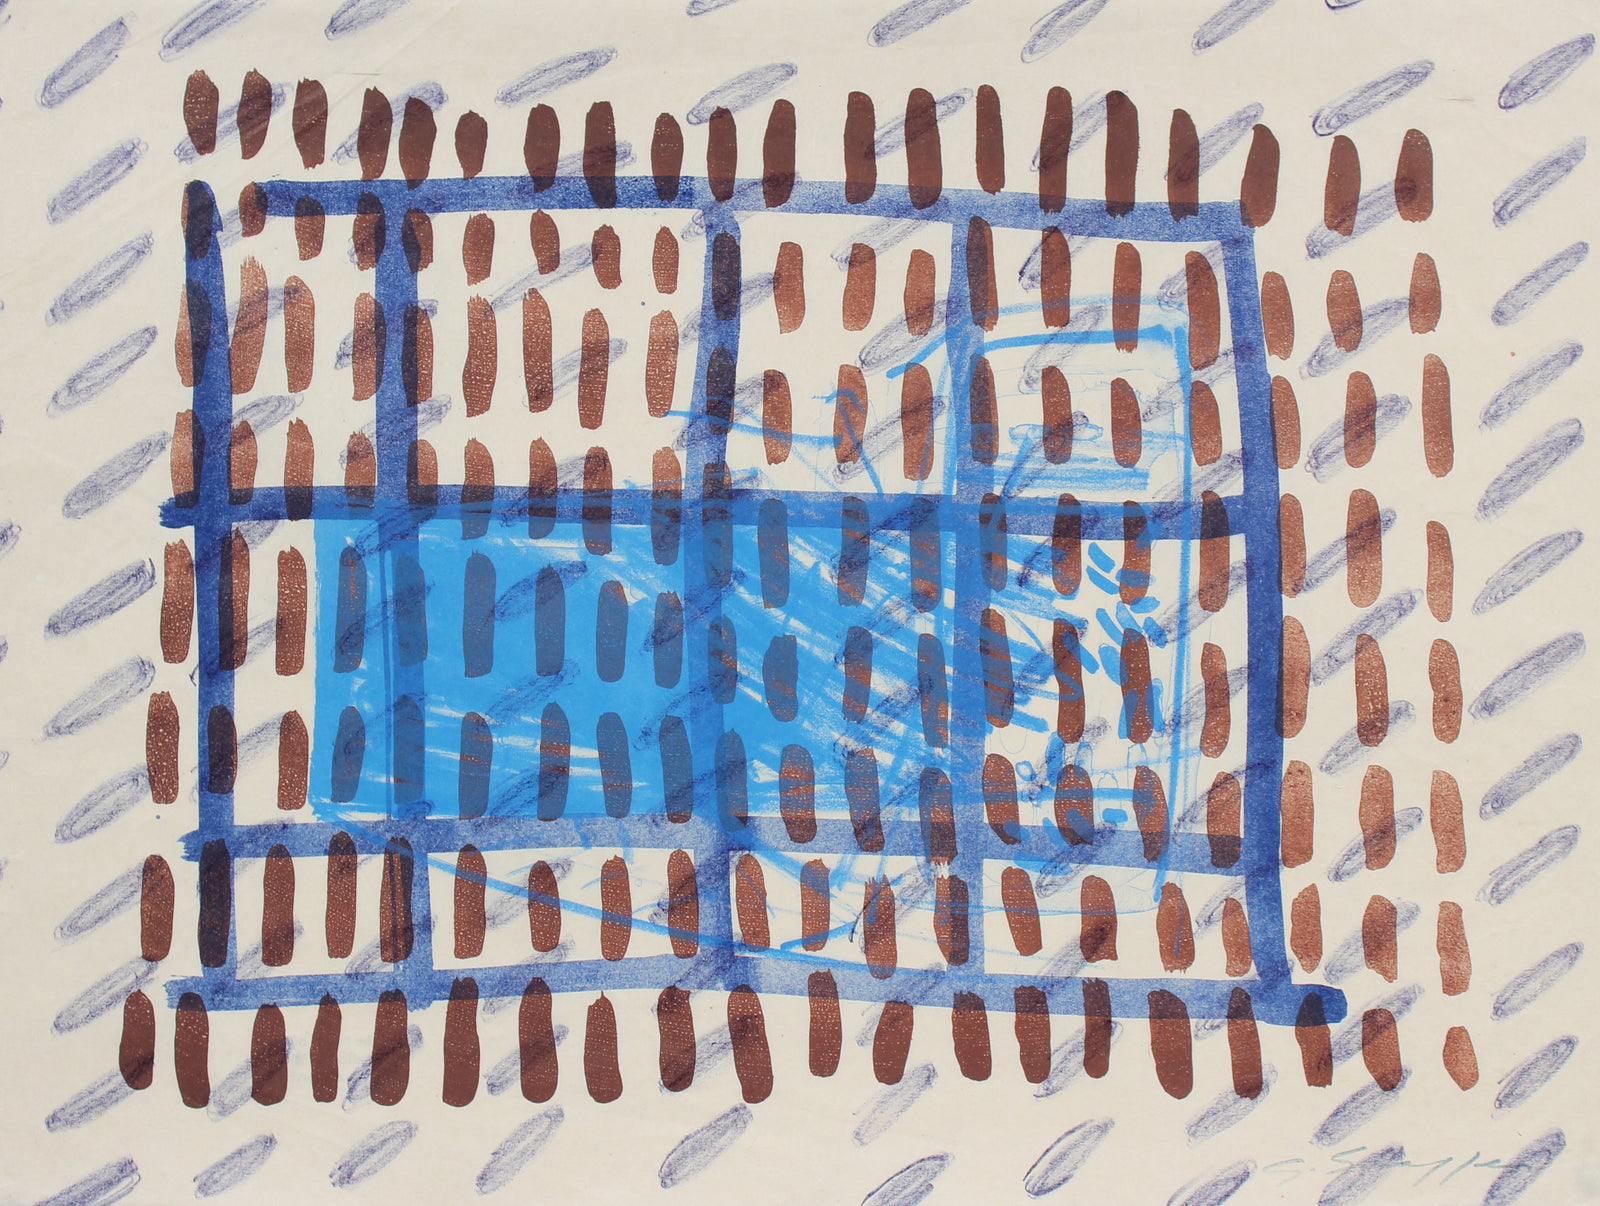 Abstracted Window Grid <br>1999 Lithograph <br><br>#96836